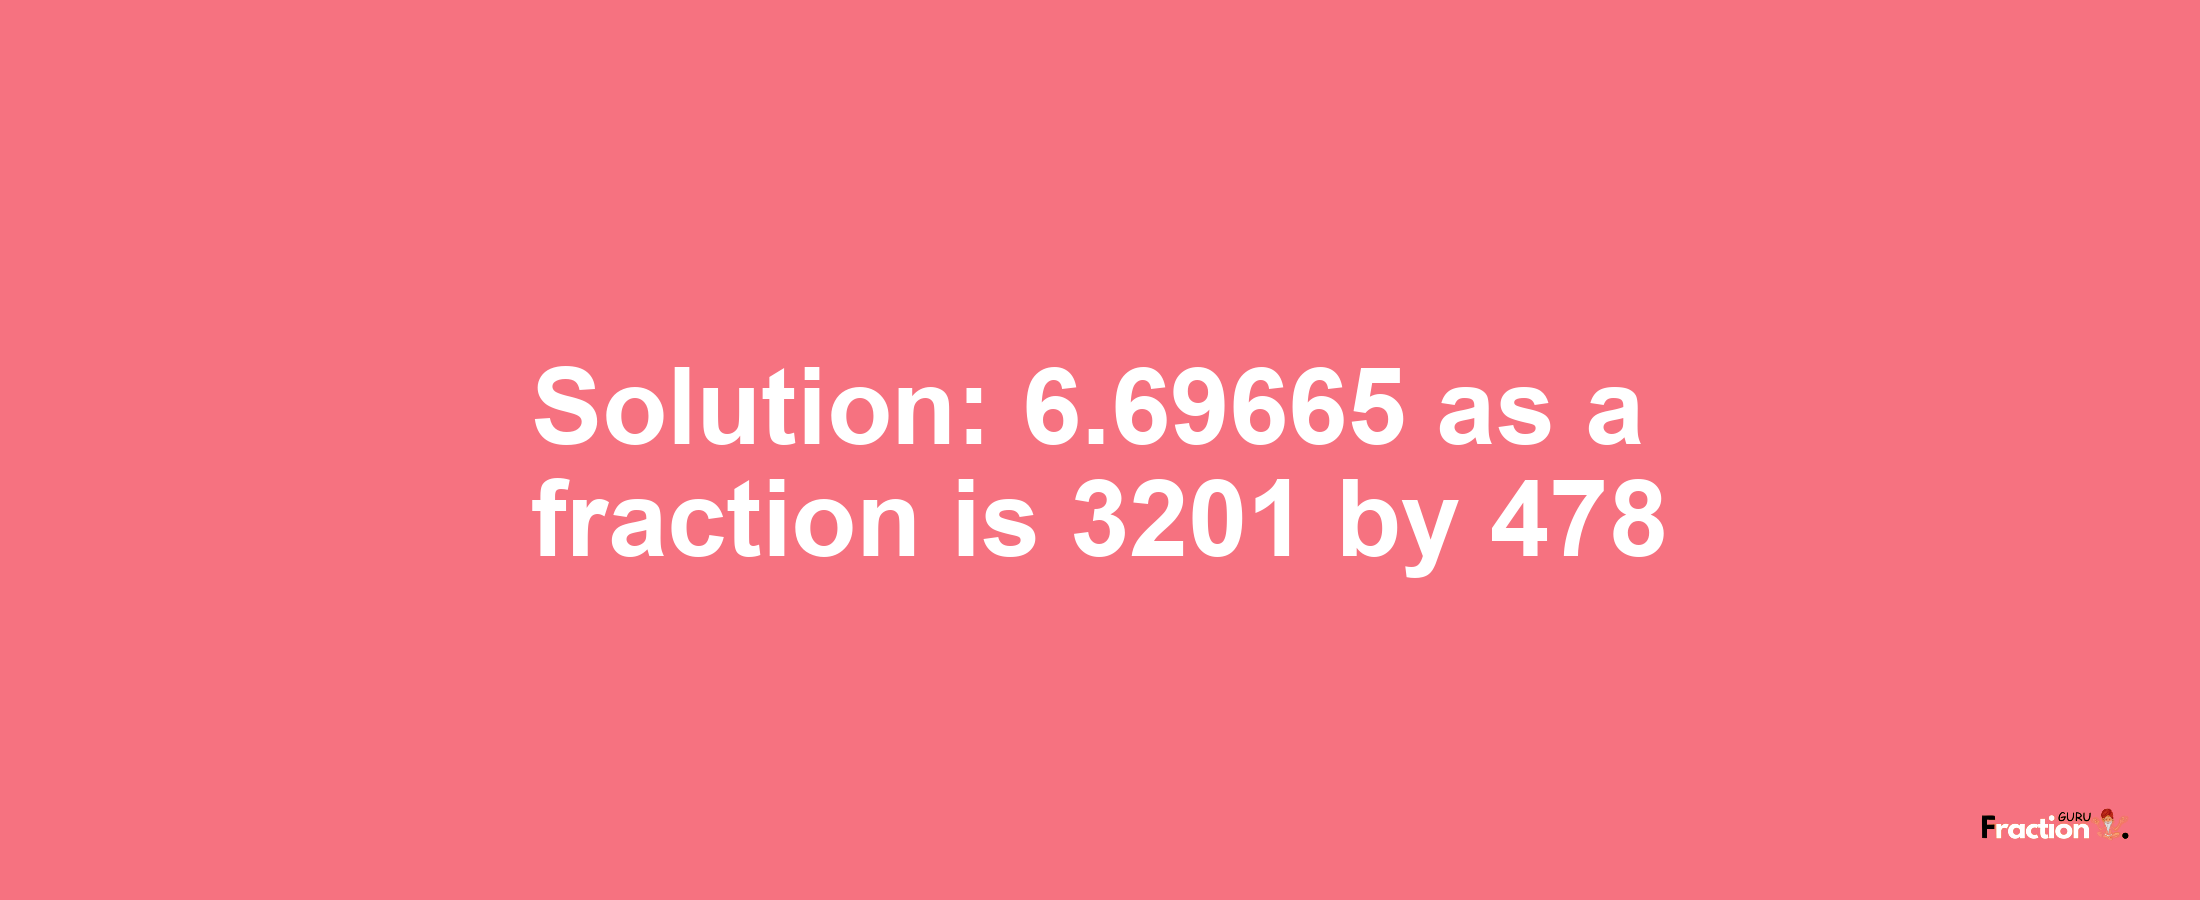 Solution:6.69665 as a fraction is 3201/478